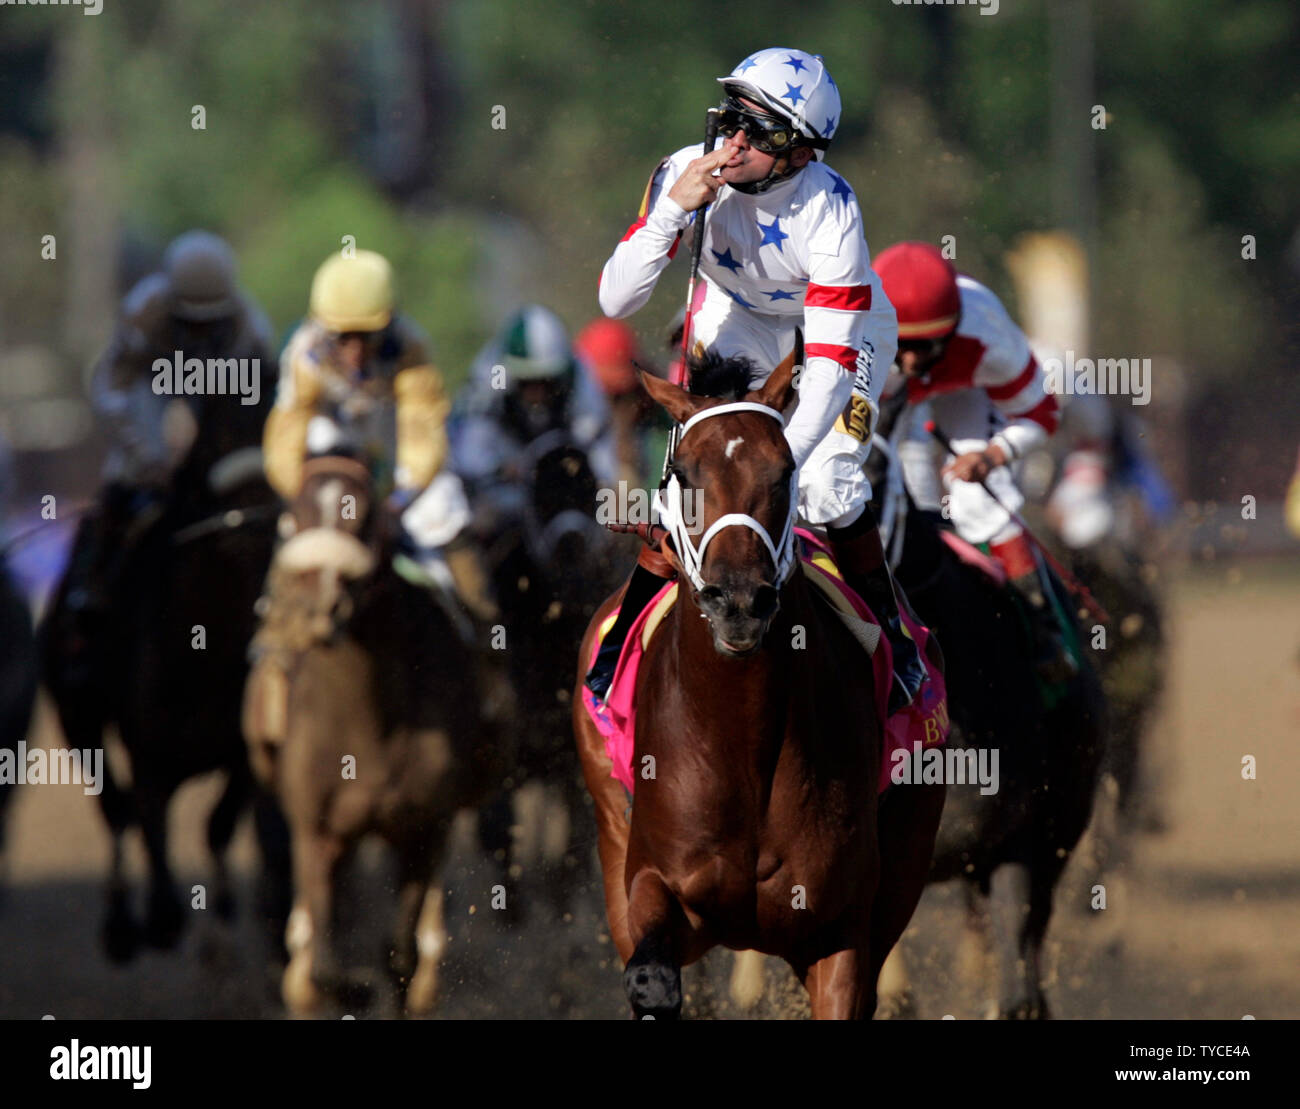 Big Brown, with jockey Kent Desormeaux (C) leads the pack en route to winning the 134th running of the Kentucky Derby at Churchill Downs in Louisville, Kentucky on May 3, 2008. (UPI Photo/Mark Cowan) Stock Photo